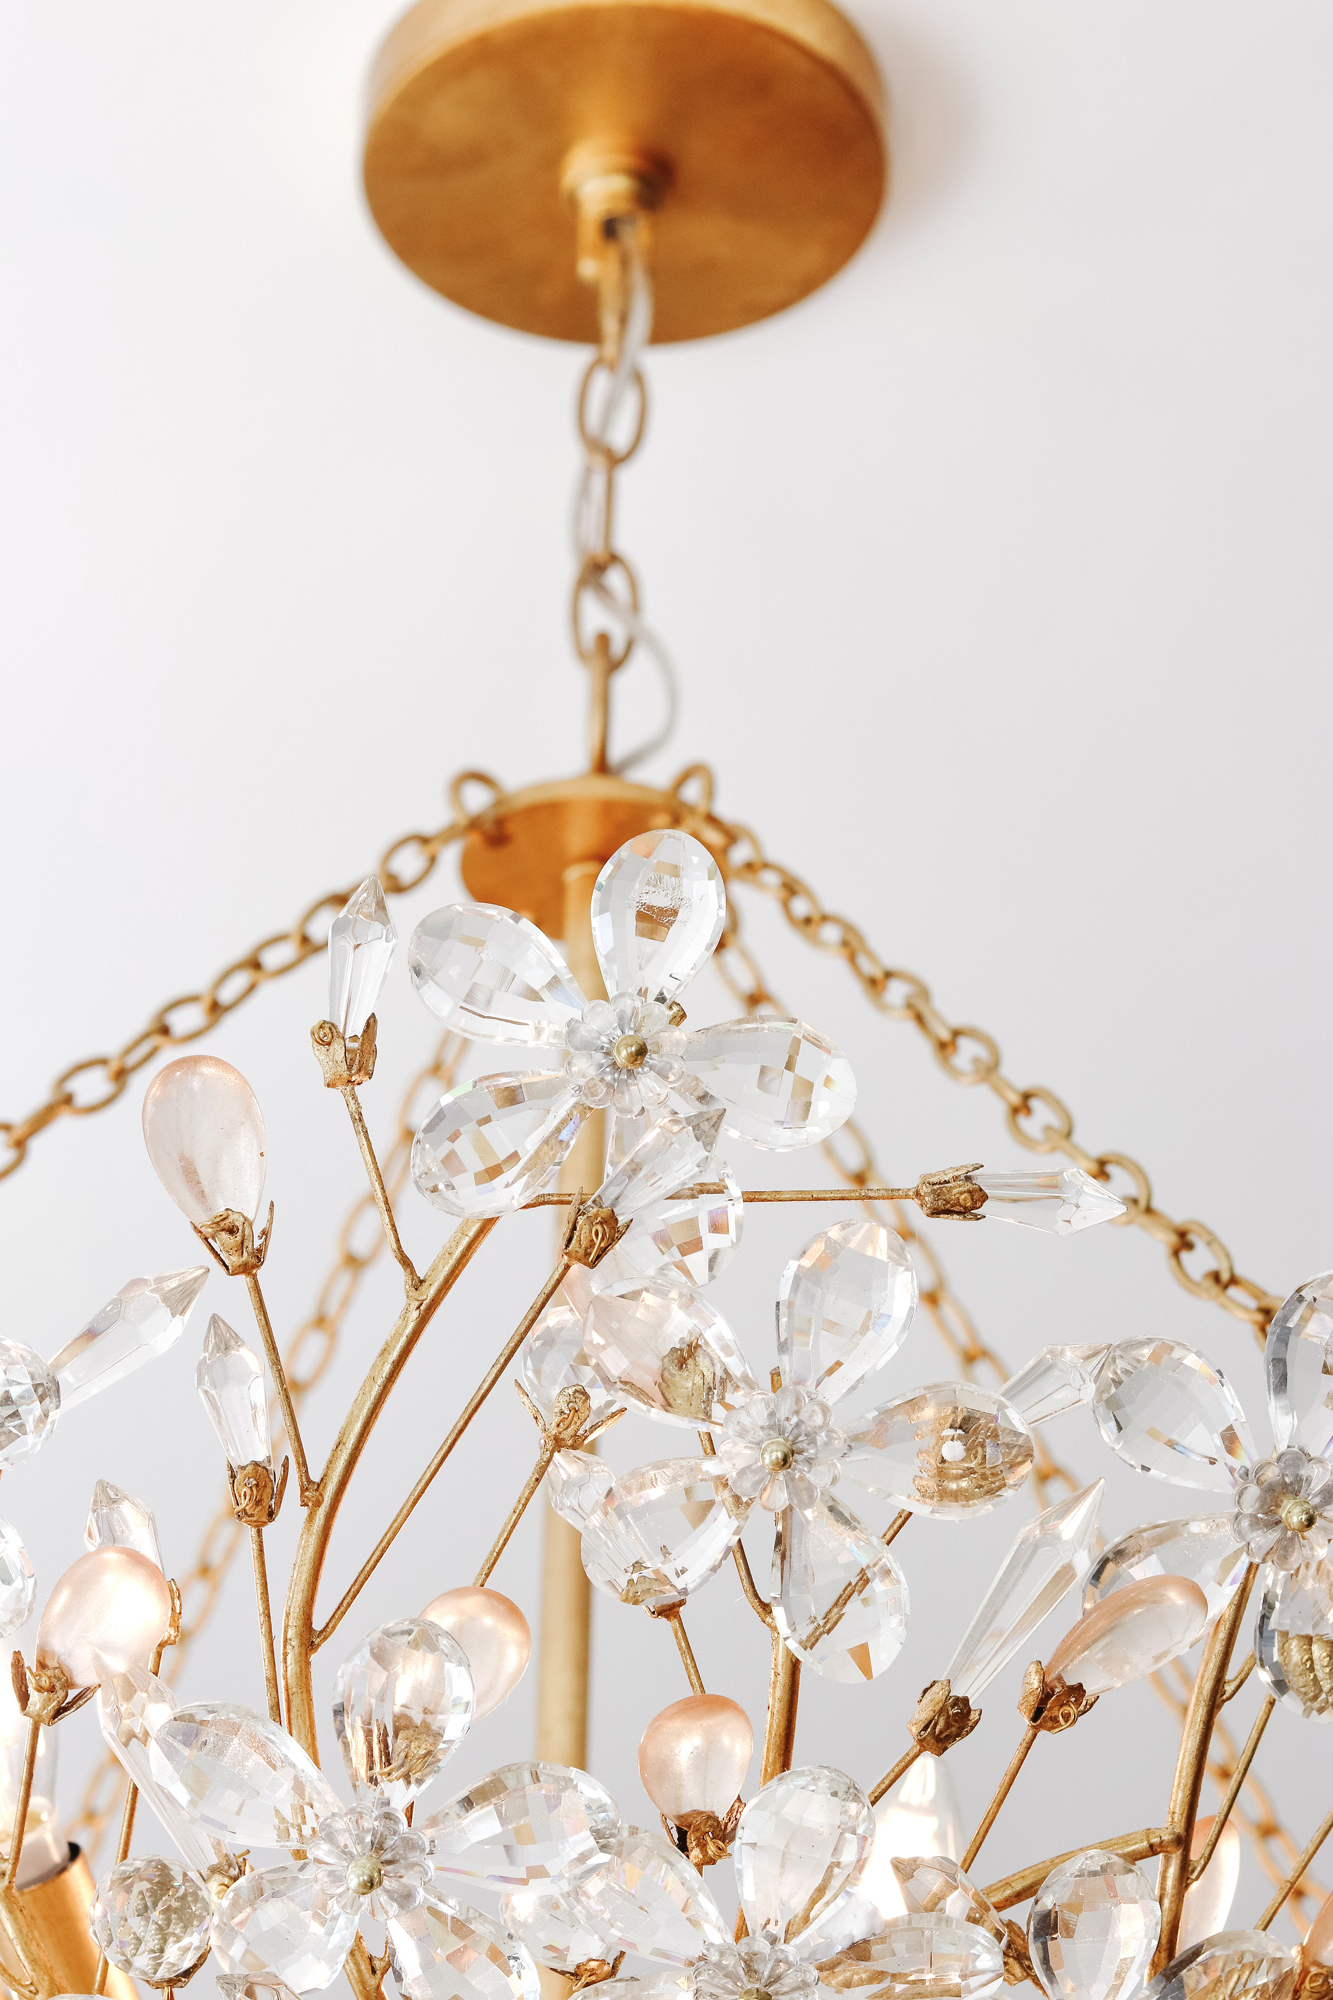 Chandelier Kathy Kuo Home 